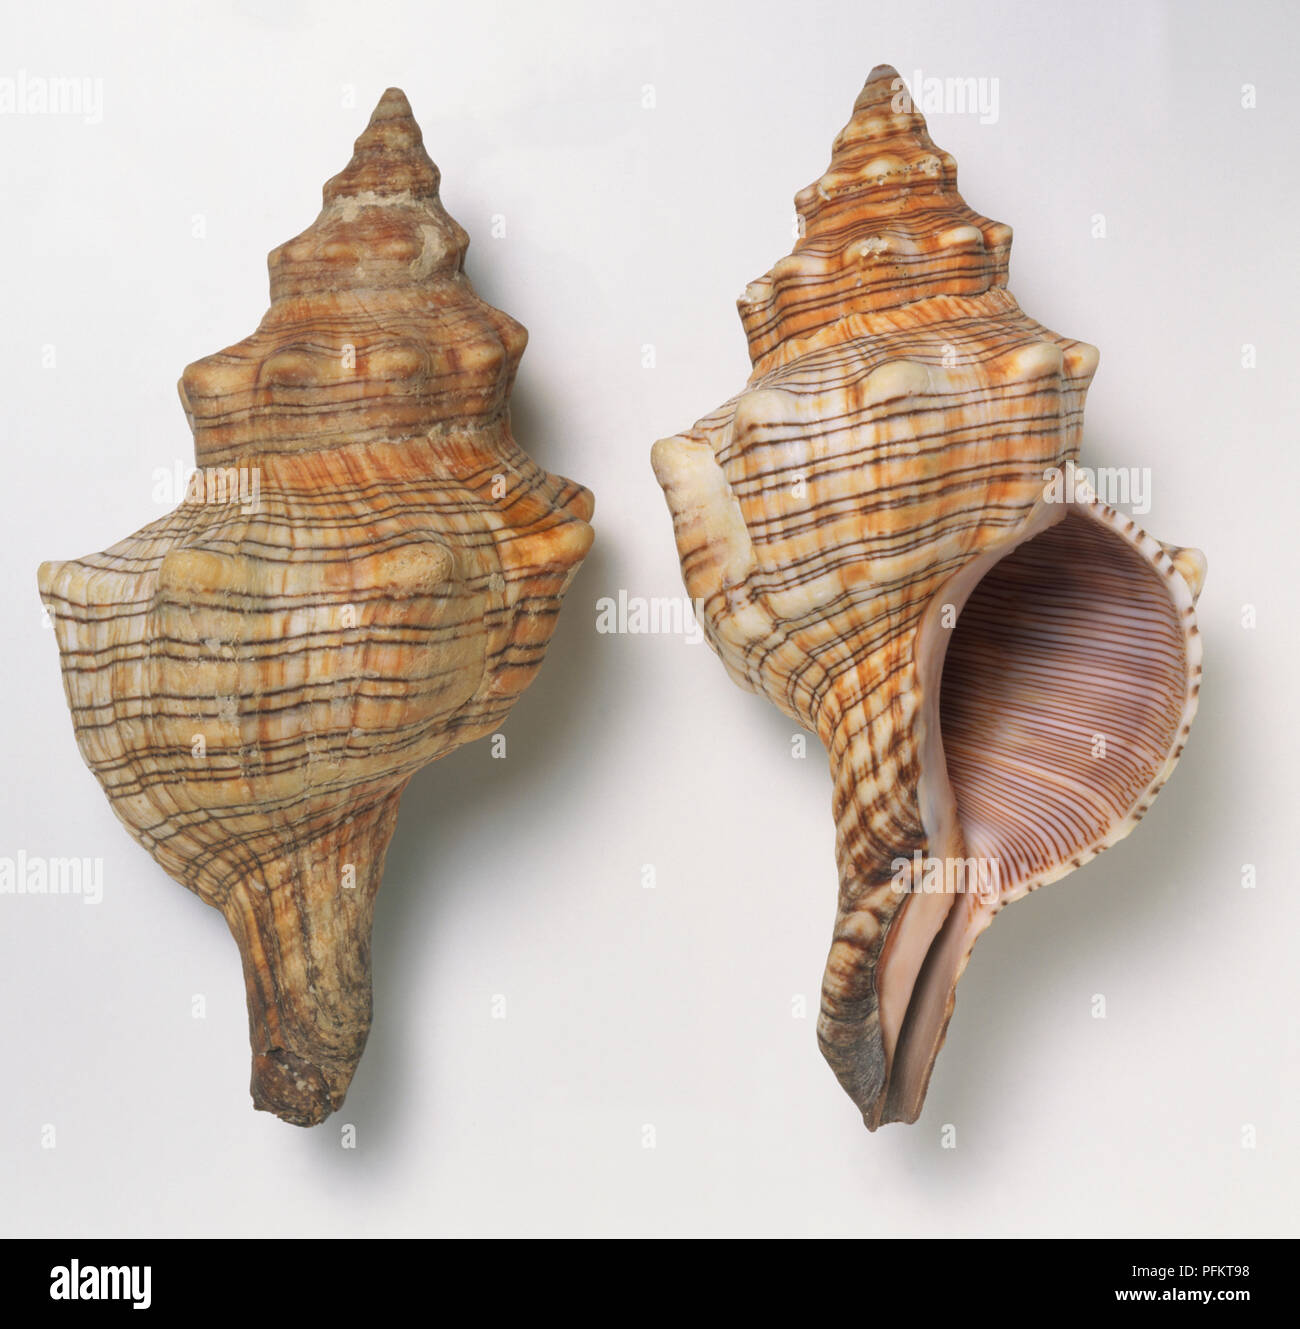 Pleuroploca trapezium, overhead and underside view of two trapezium horse conch shell, large body shell with spiral rows with strong growth ridges, red cream colour with thin brown lines. Stock Photo